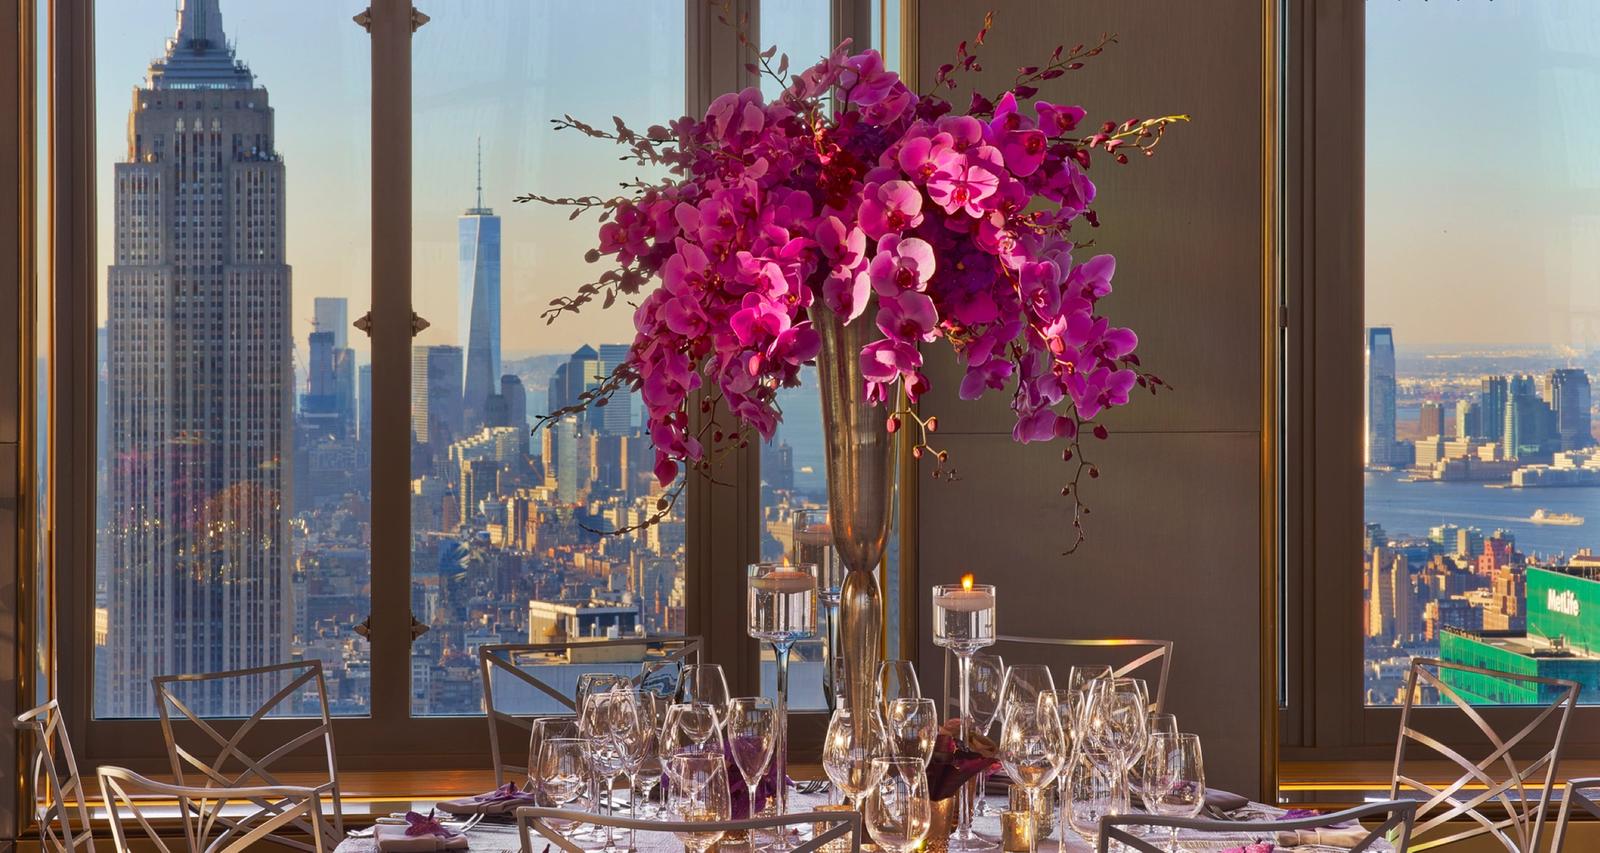 Rainbow Room event space with beautiful views